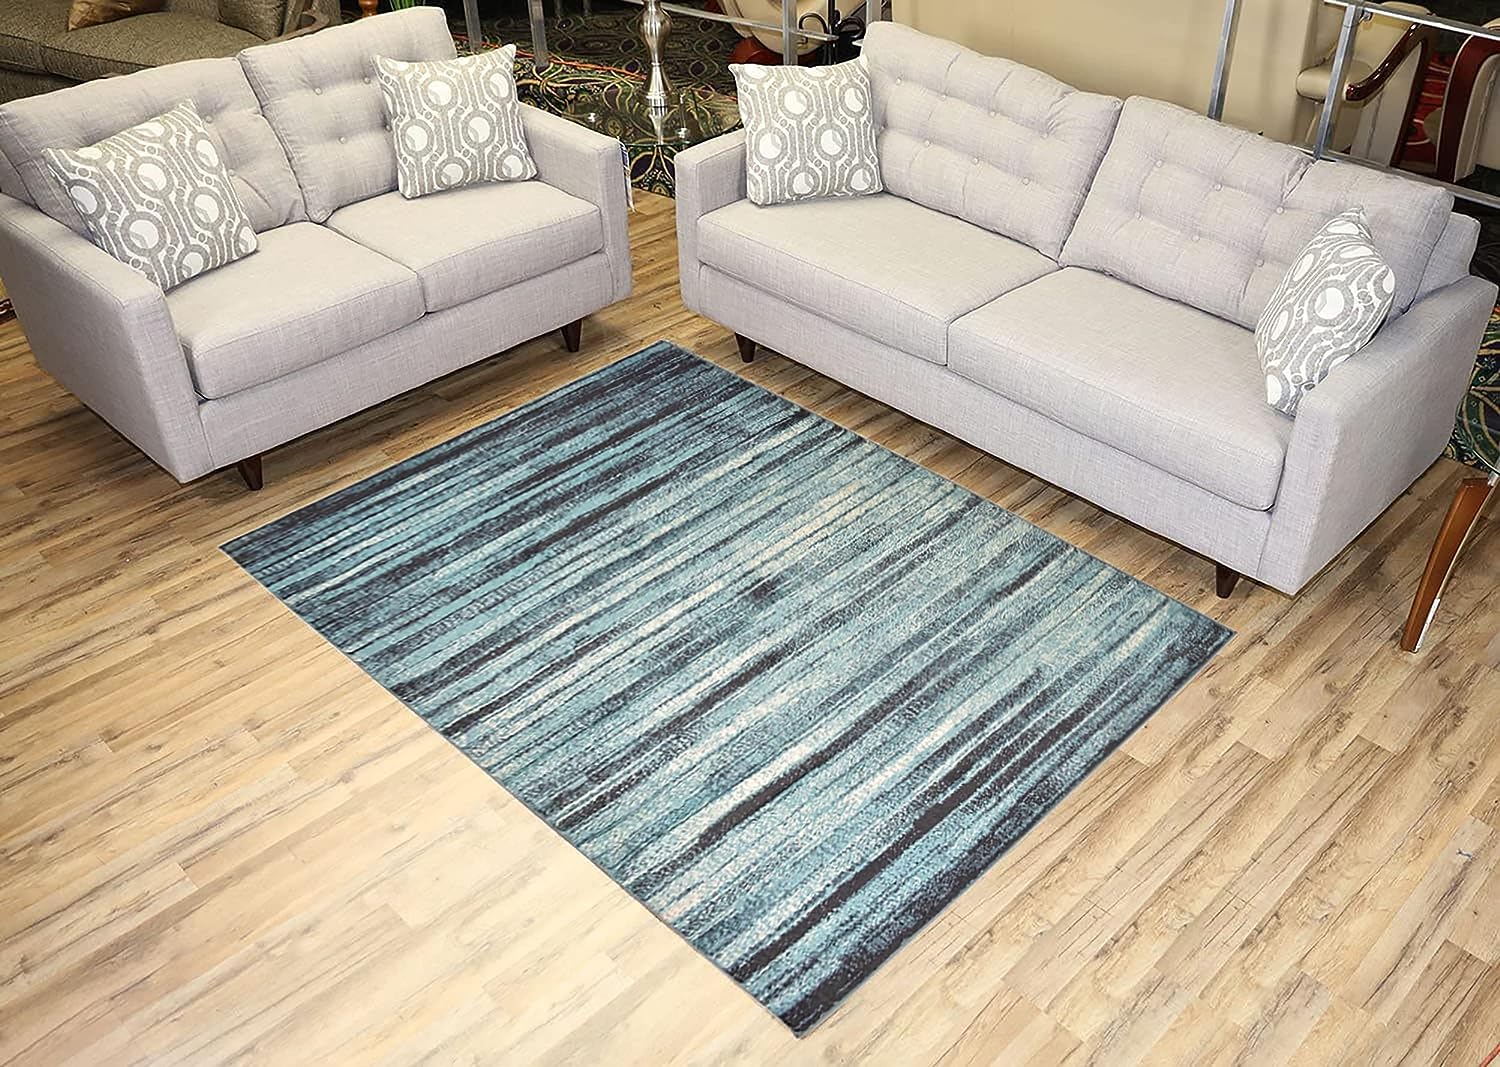 Studio Collection Vintage Distressed Stripes Abstract Design Contemporary Modern Area Rug (Stripes Aqua Blue, 5 x 7)-1